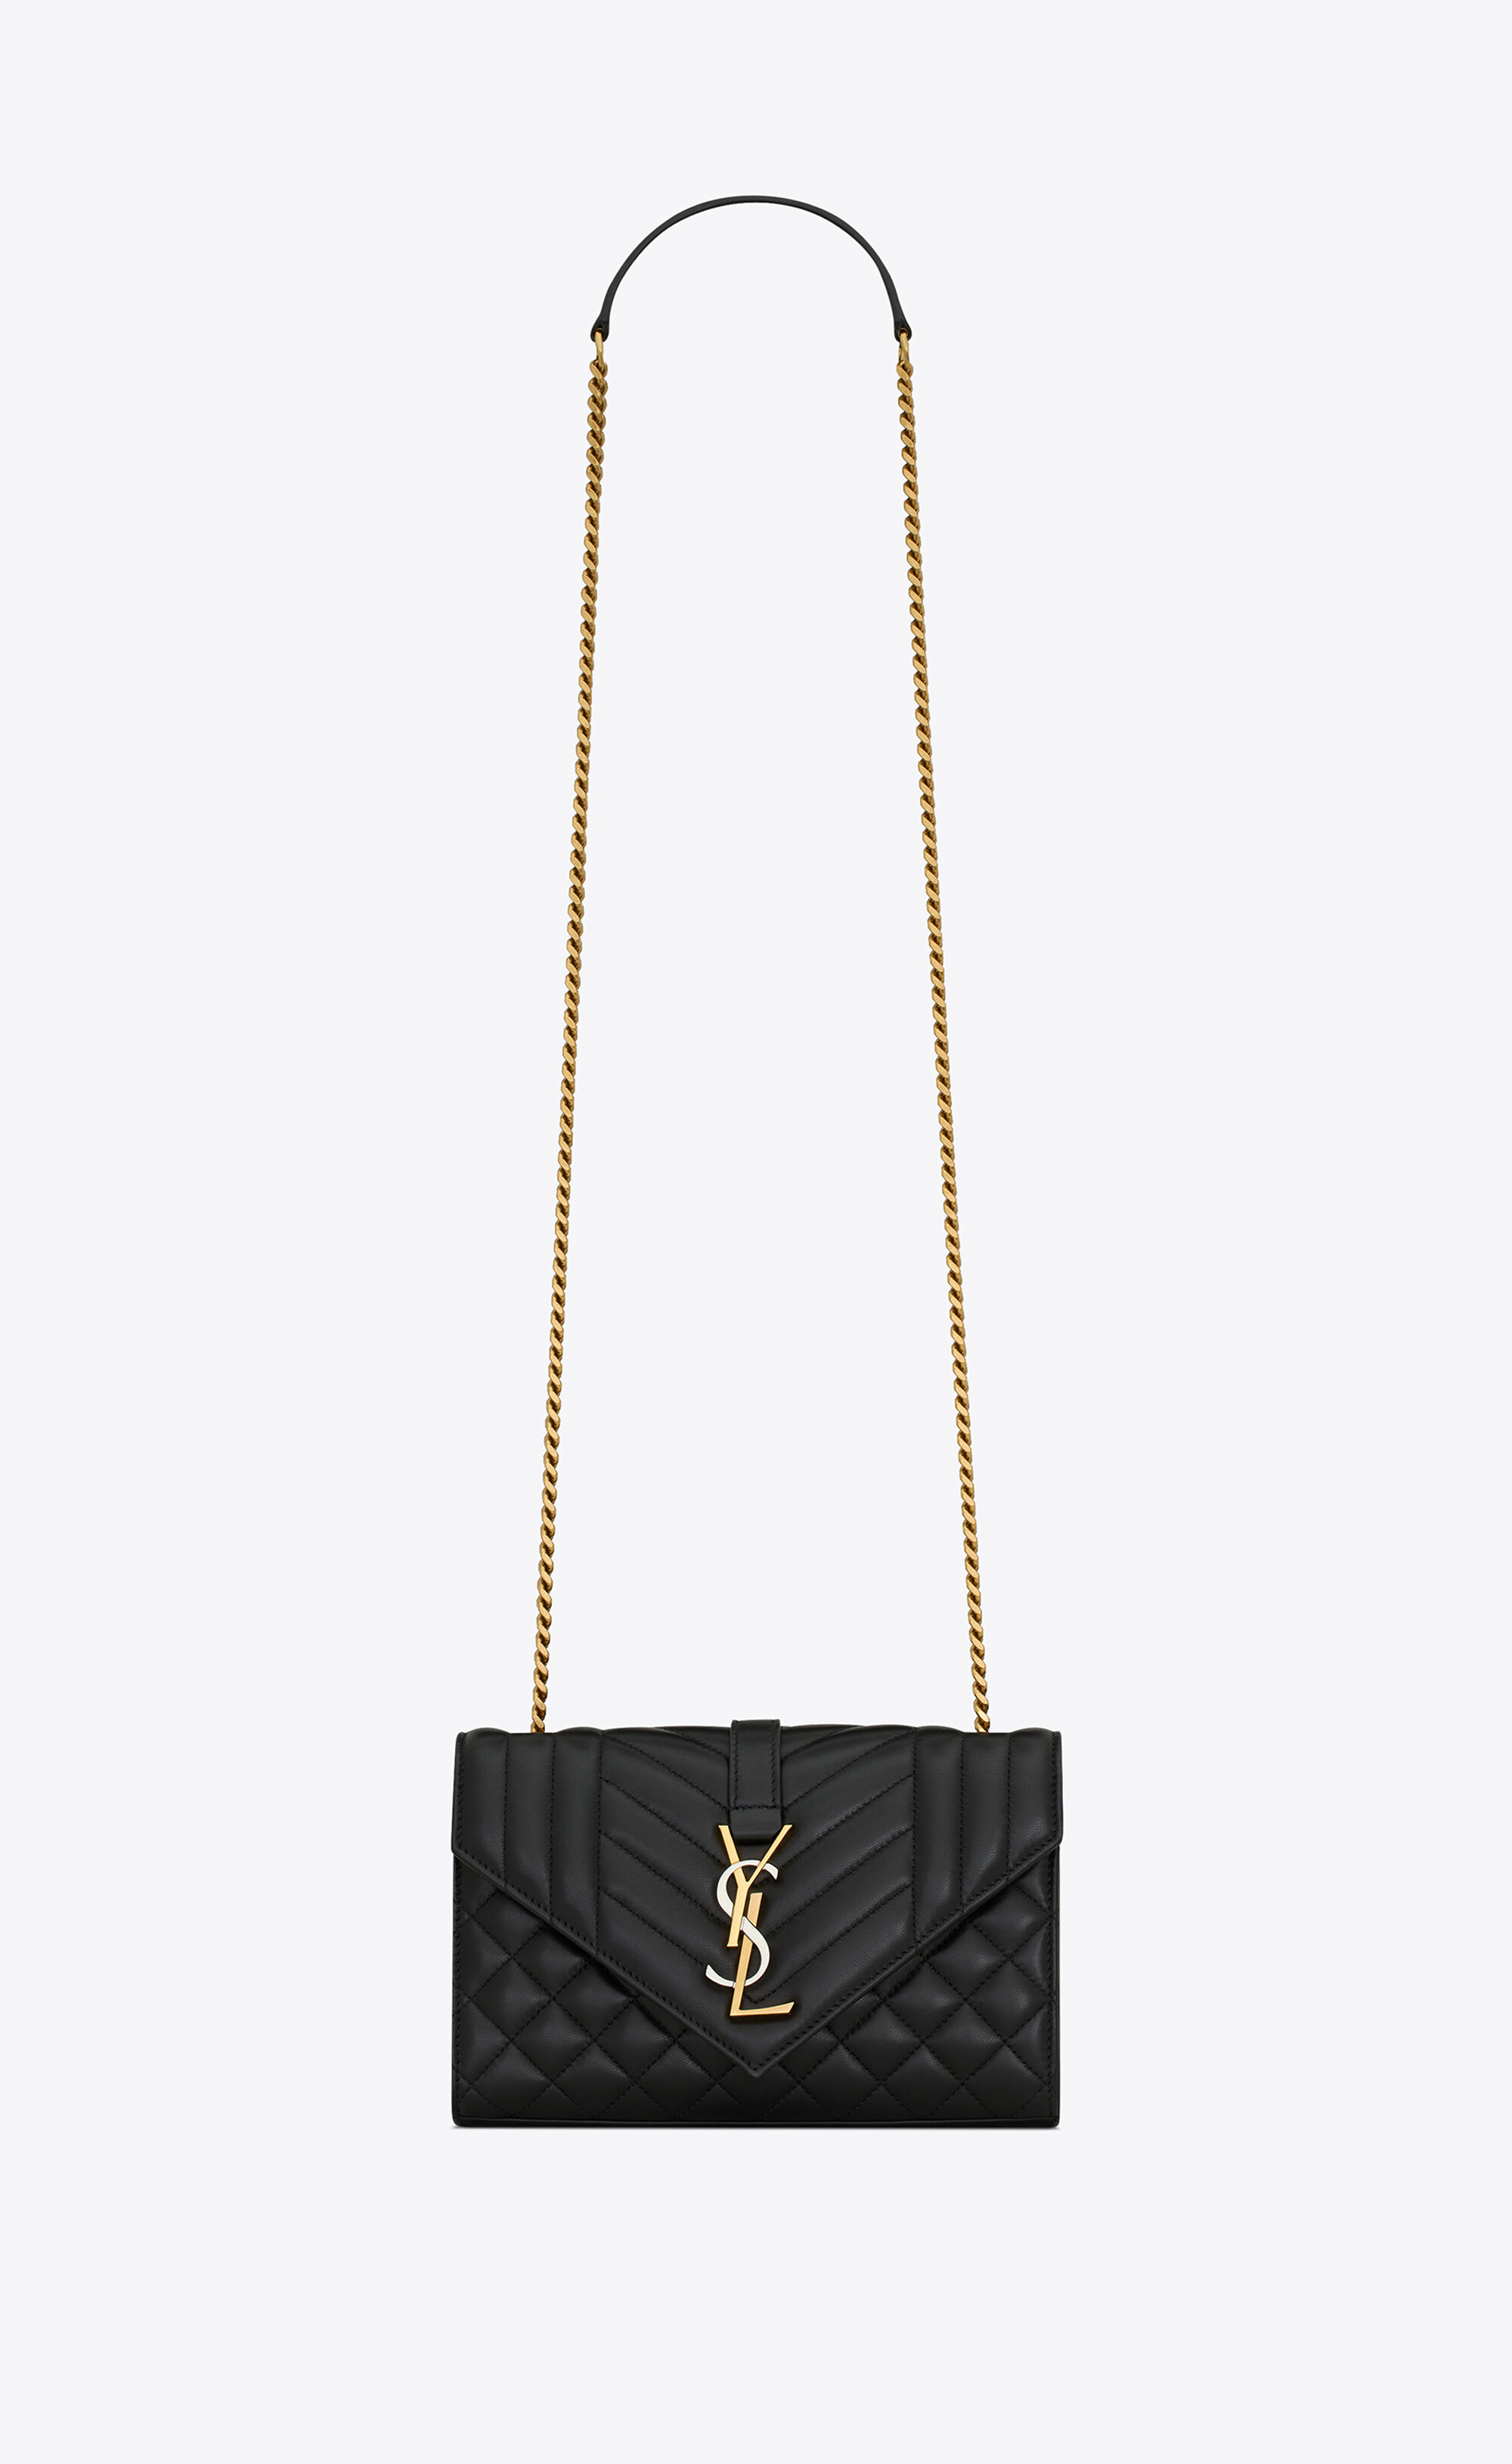 YSL WOC super invincible and practical small bag caviare. The calfskin